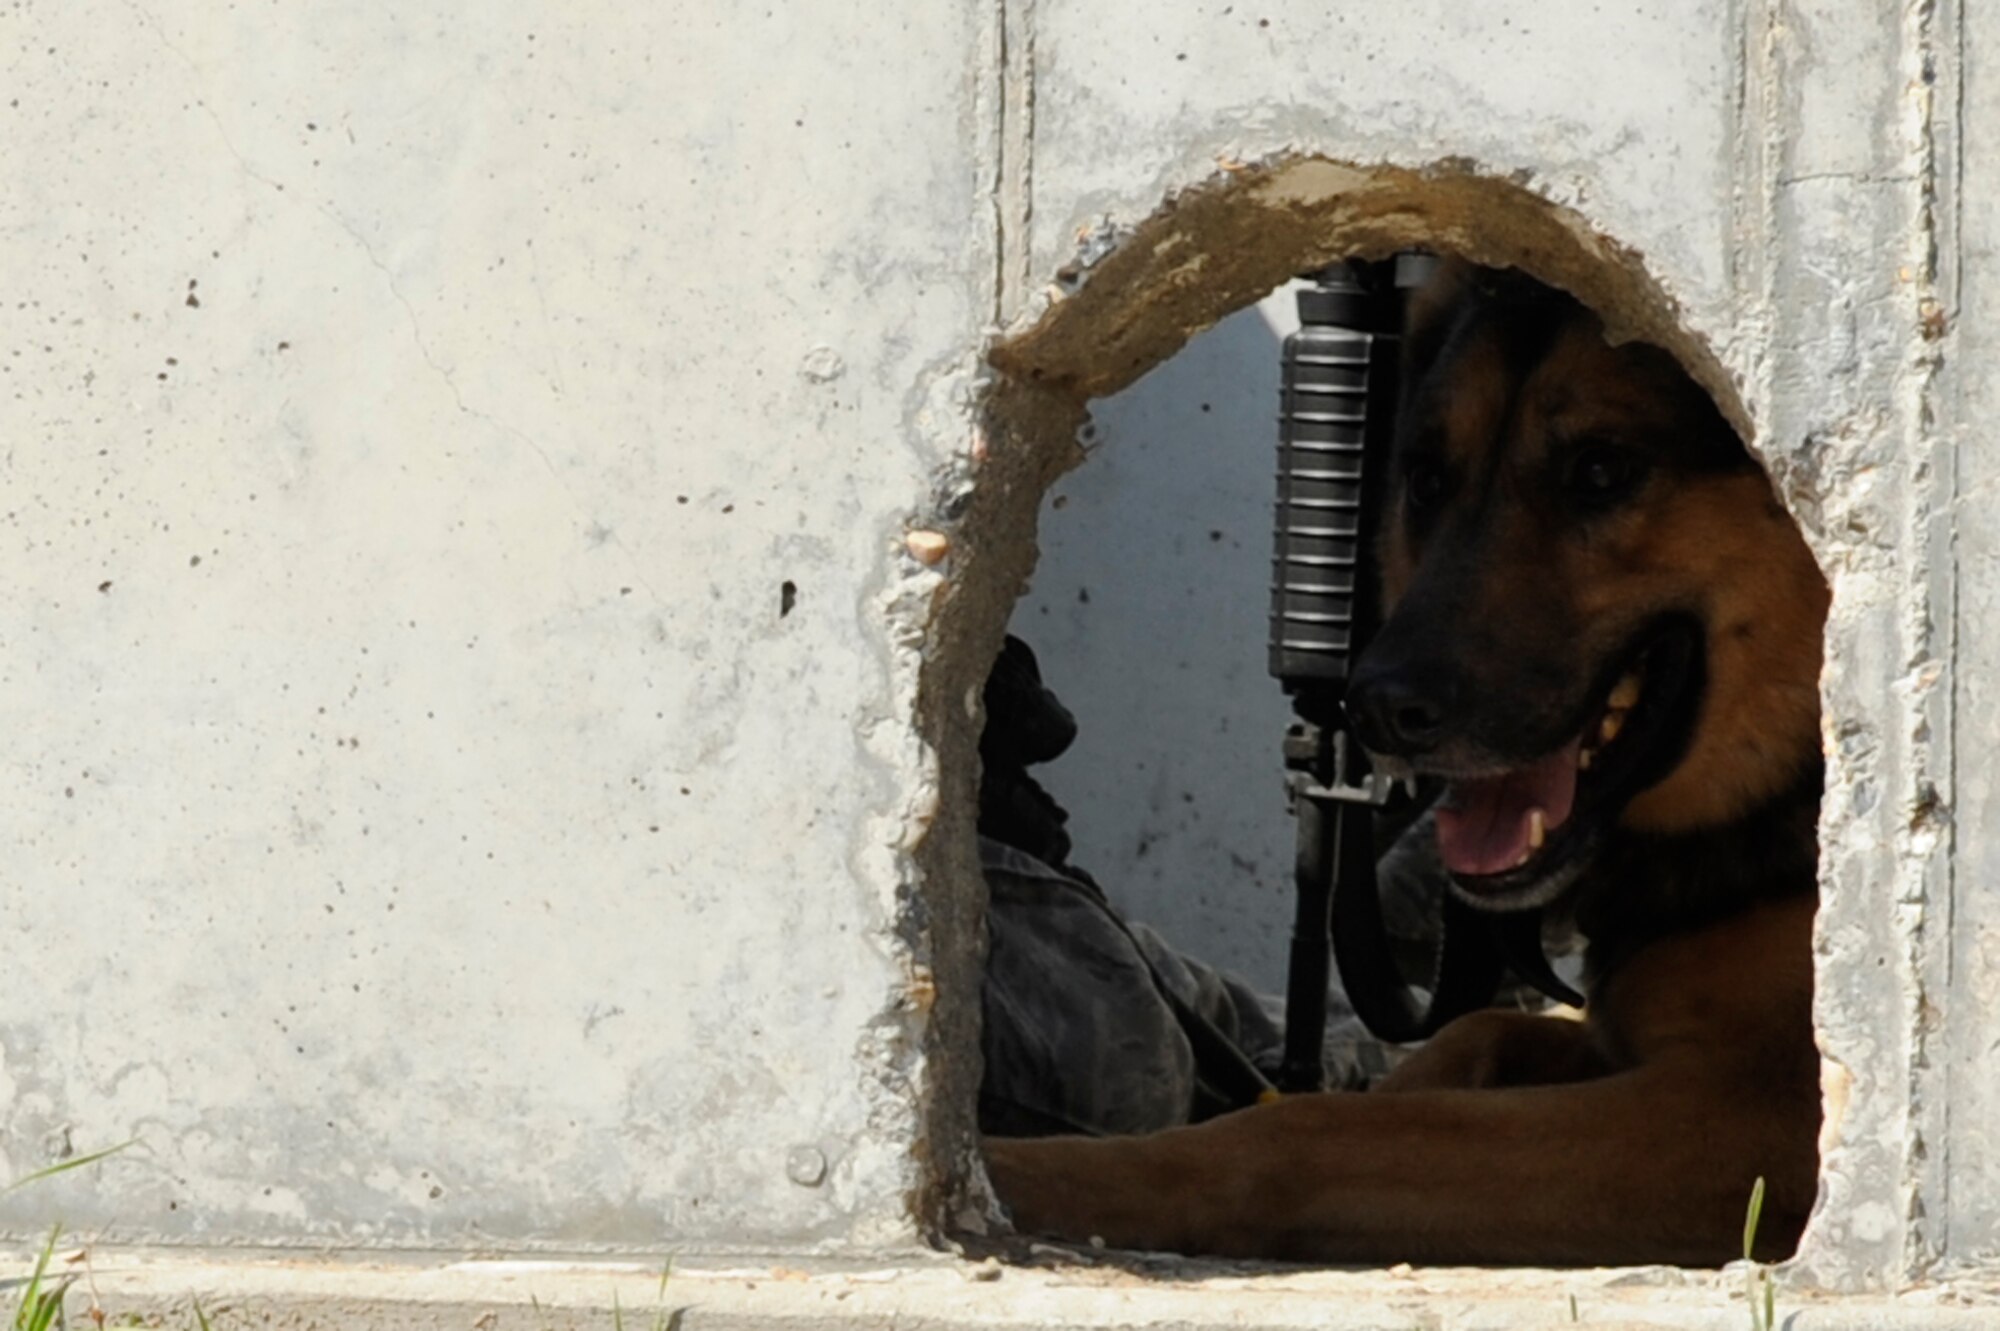 VANDENBERG AIR FORCE BASE, Calif. -- Samon, a 30th Security Forces Squadron working dog, scans the area through a drainage hole in a concrete defensive post during a simulated fire fight with opposition forces during a North Star event here Thursday, Oct. 20, 2011. The exercise trained Airmen during a simulated deployed environment in which they practiced deployment training and response time. (U.S. Air Force photo/Senior Airman Lael Huss)